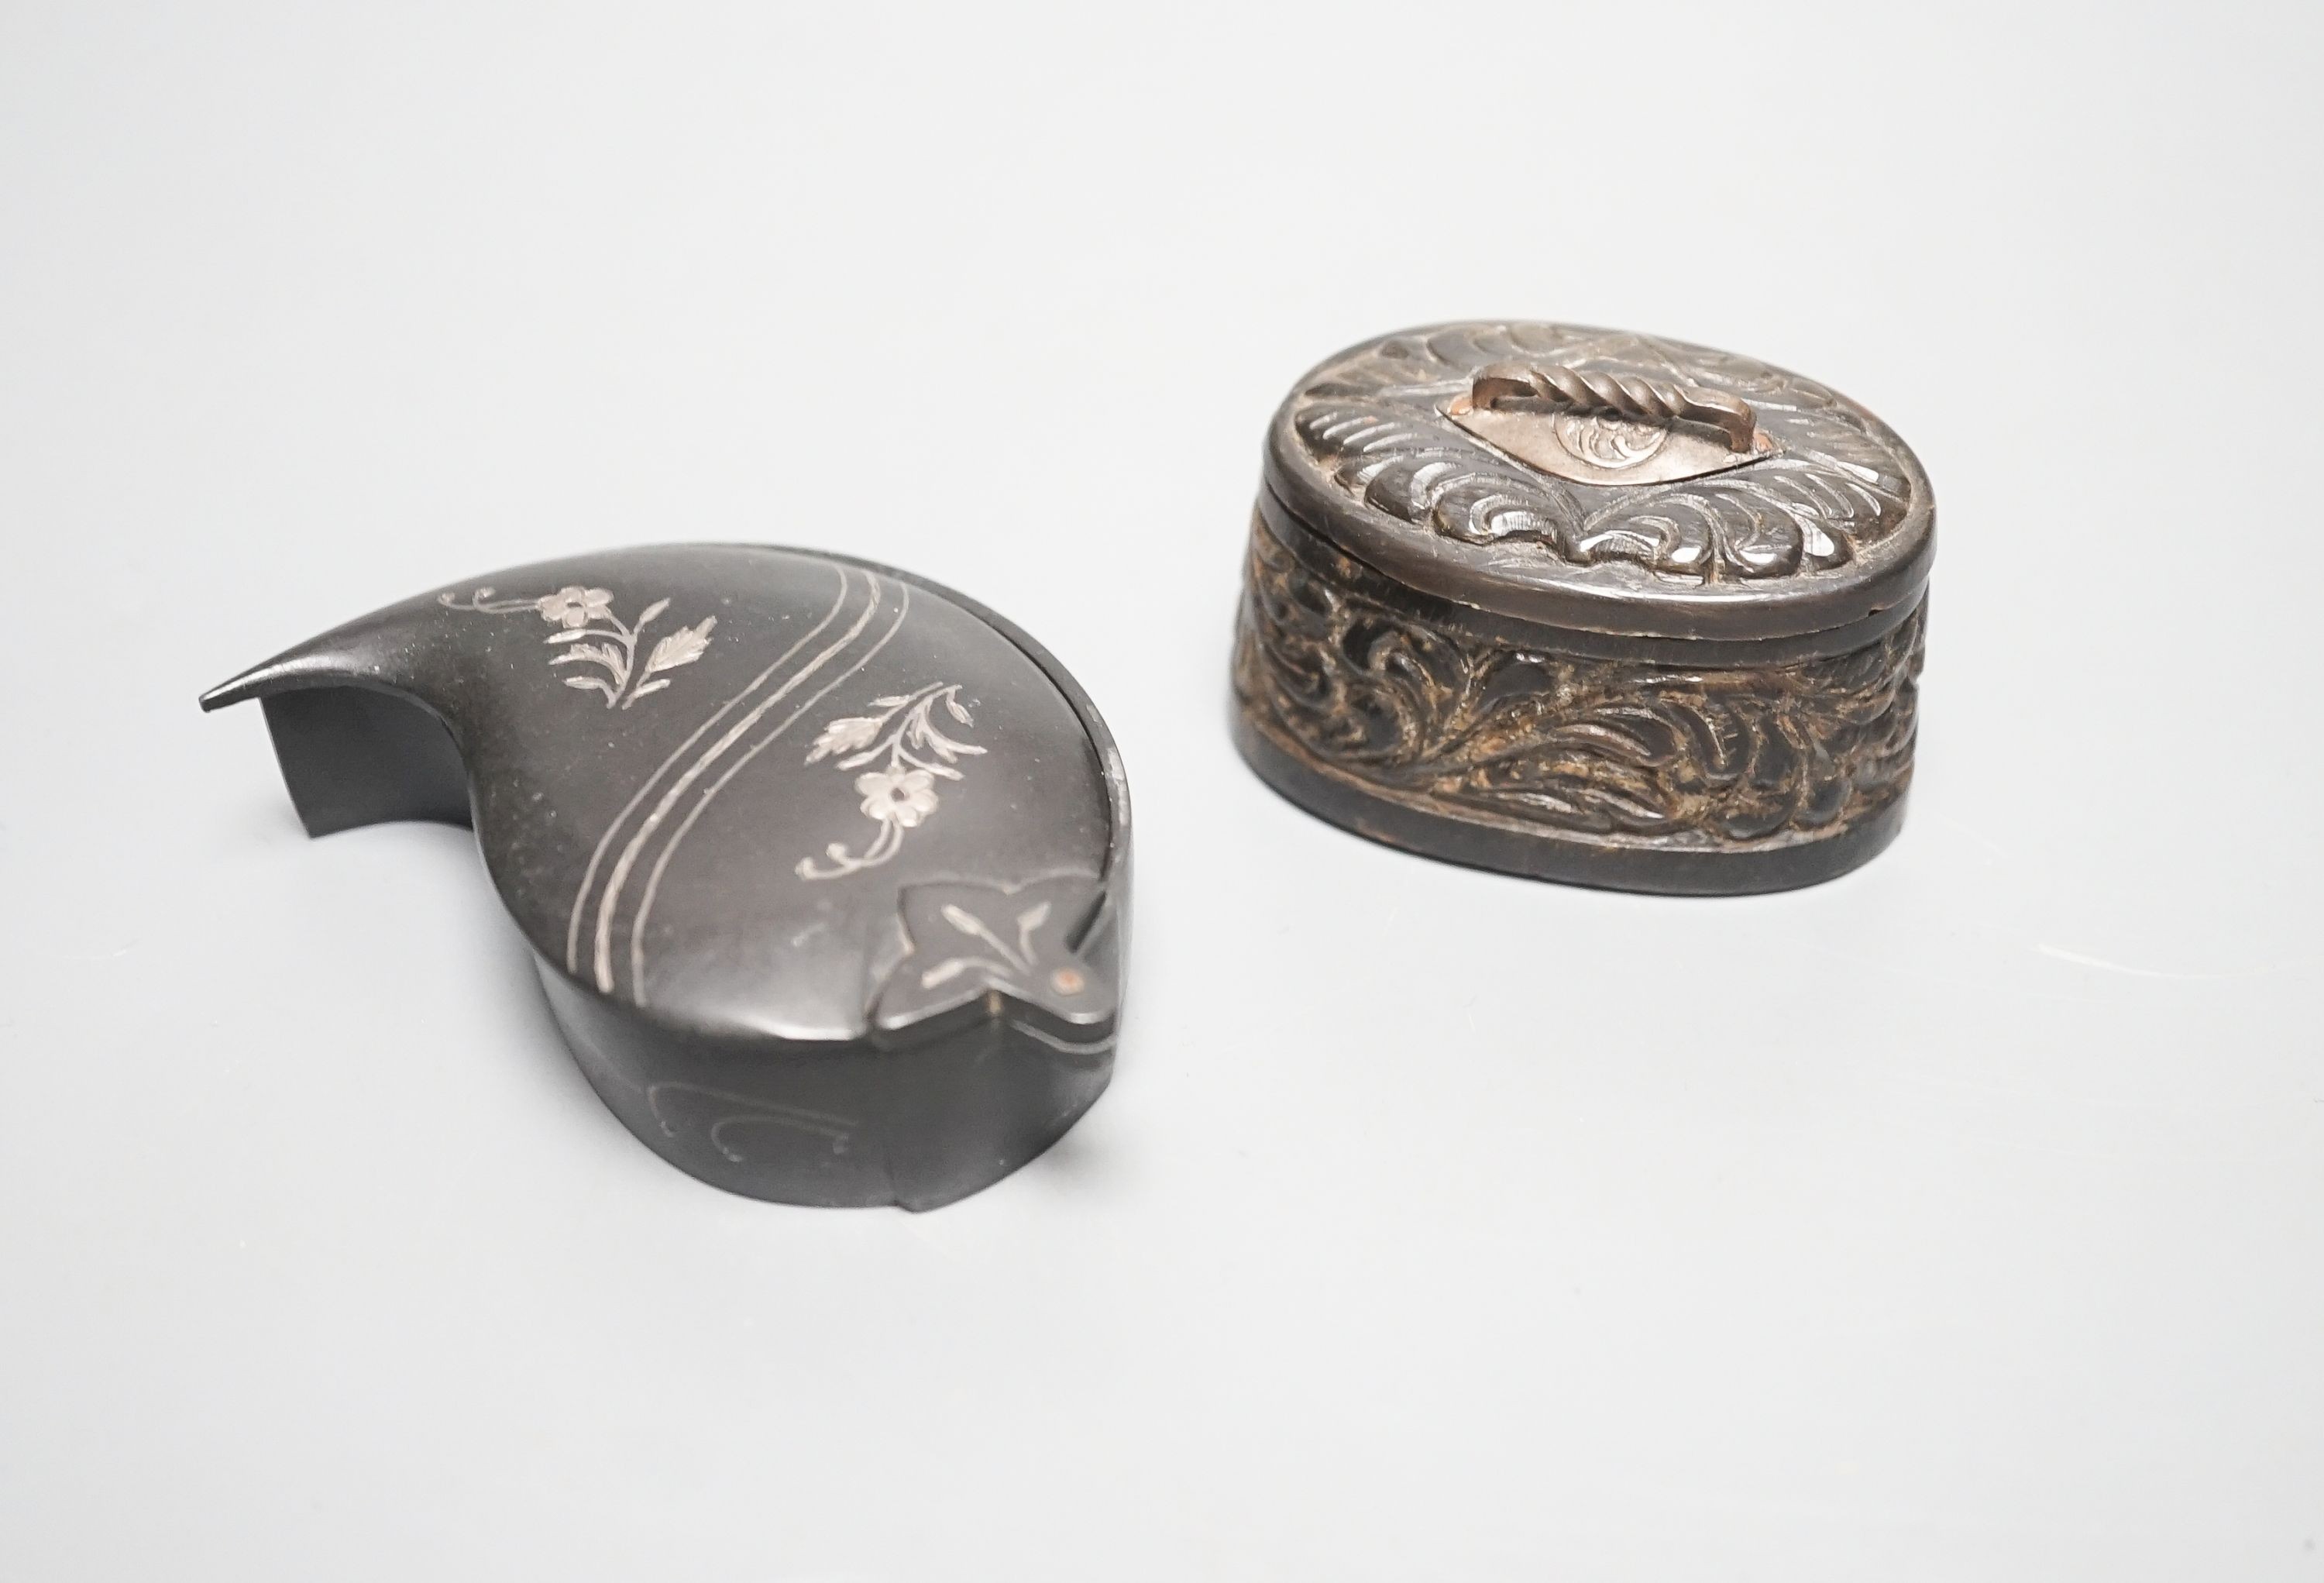 A 19th century Malay horn betel nut box and a Bidriware silver inlaid ‘boteh’ box and cover